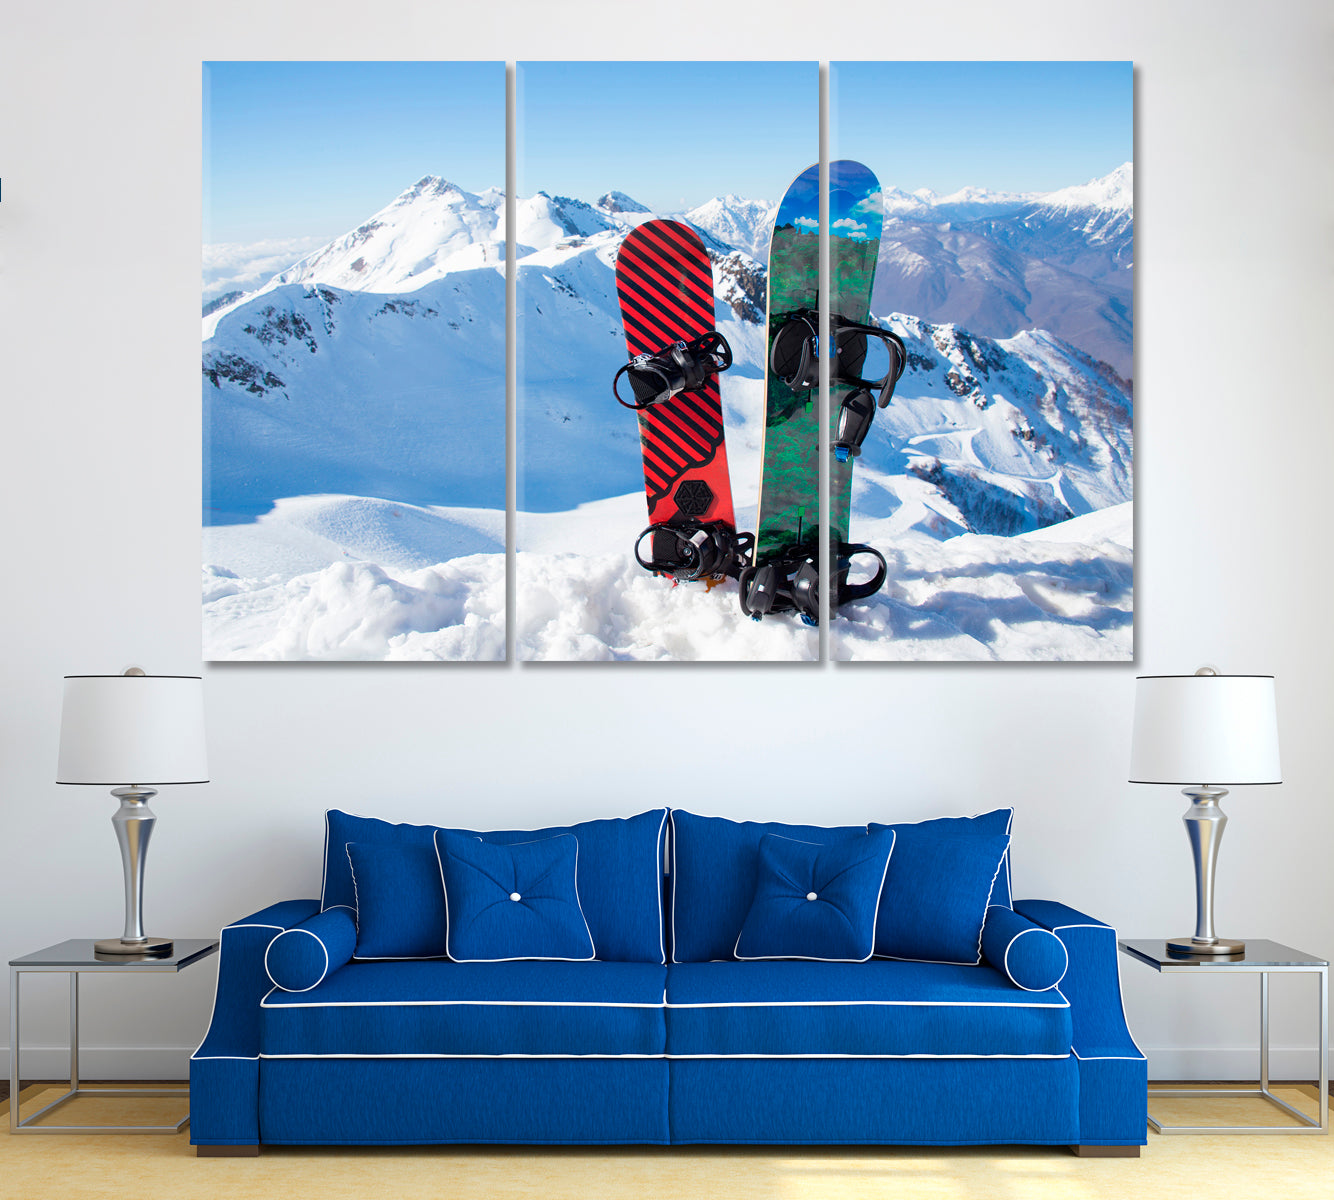 Two Snowboards in Snow Canvas Print ArtLexy 3 Panels 36"x24" inches 